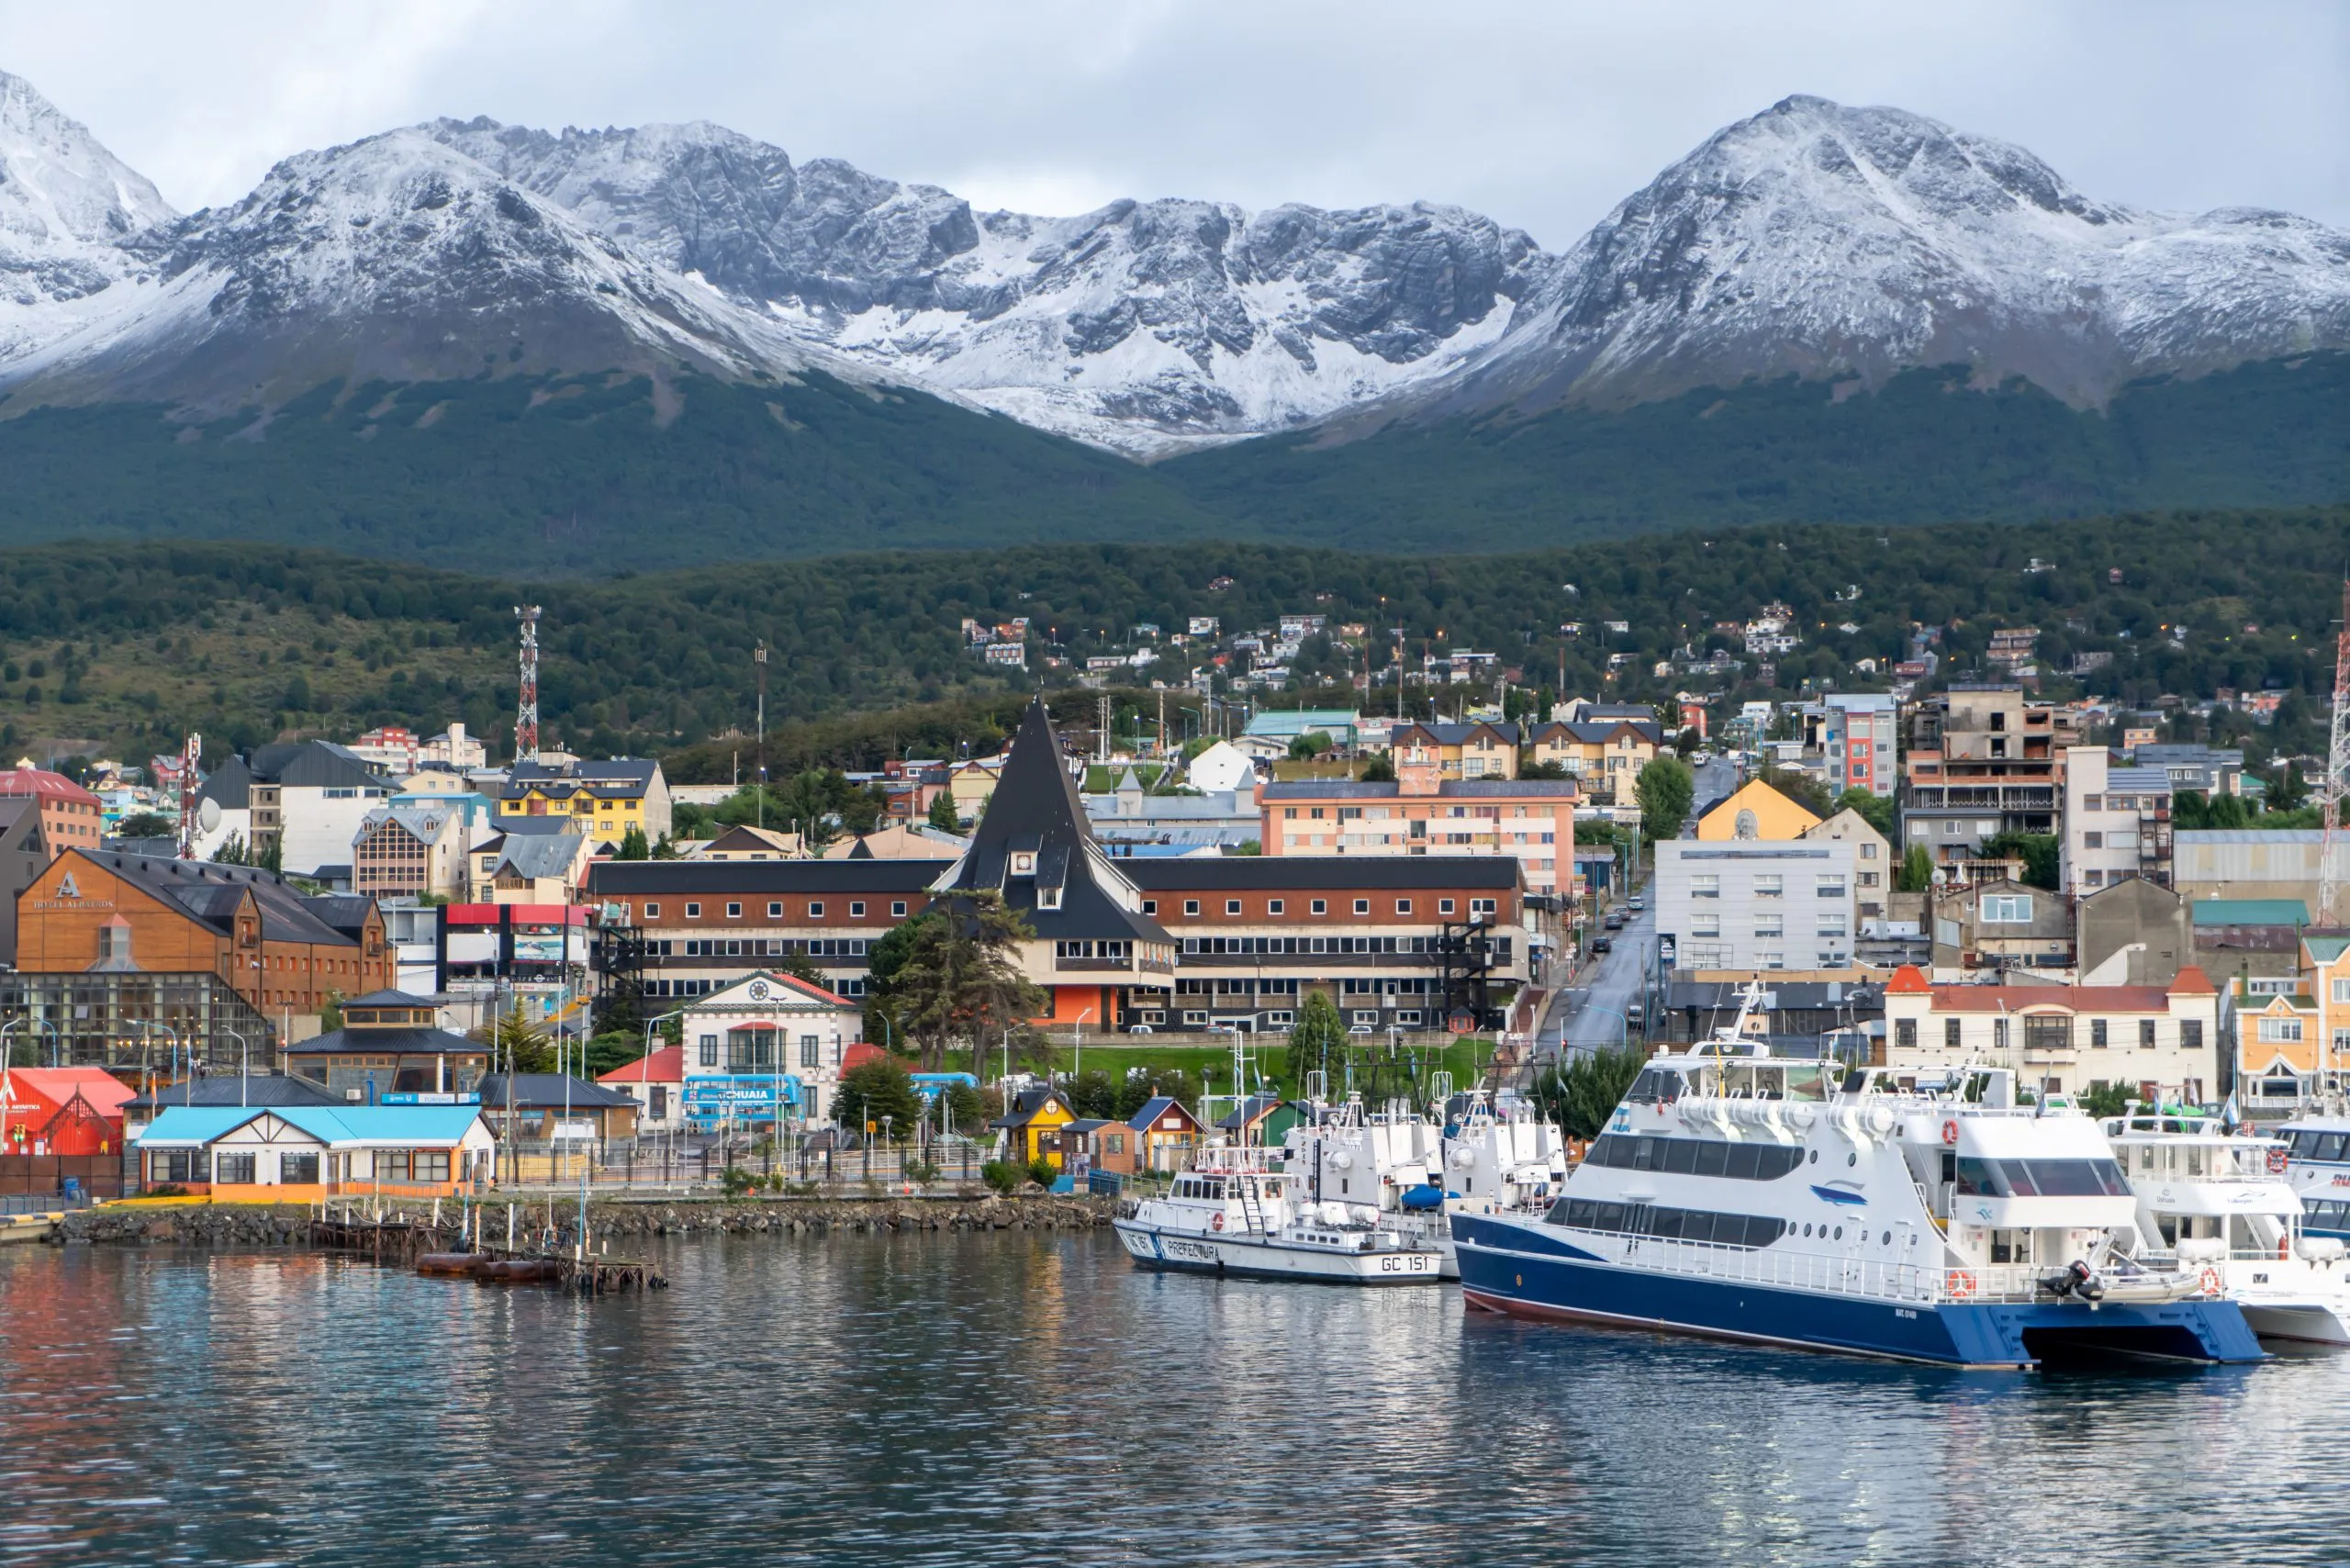 Argentina, Patagonia, in the city of Ushuaia. View on the Harbour from the sea side.